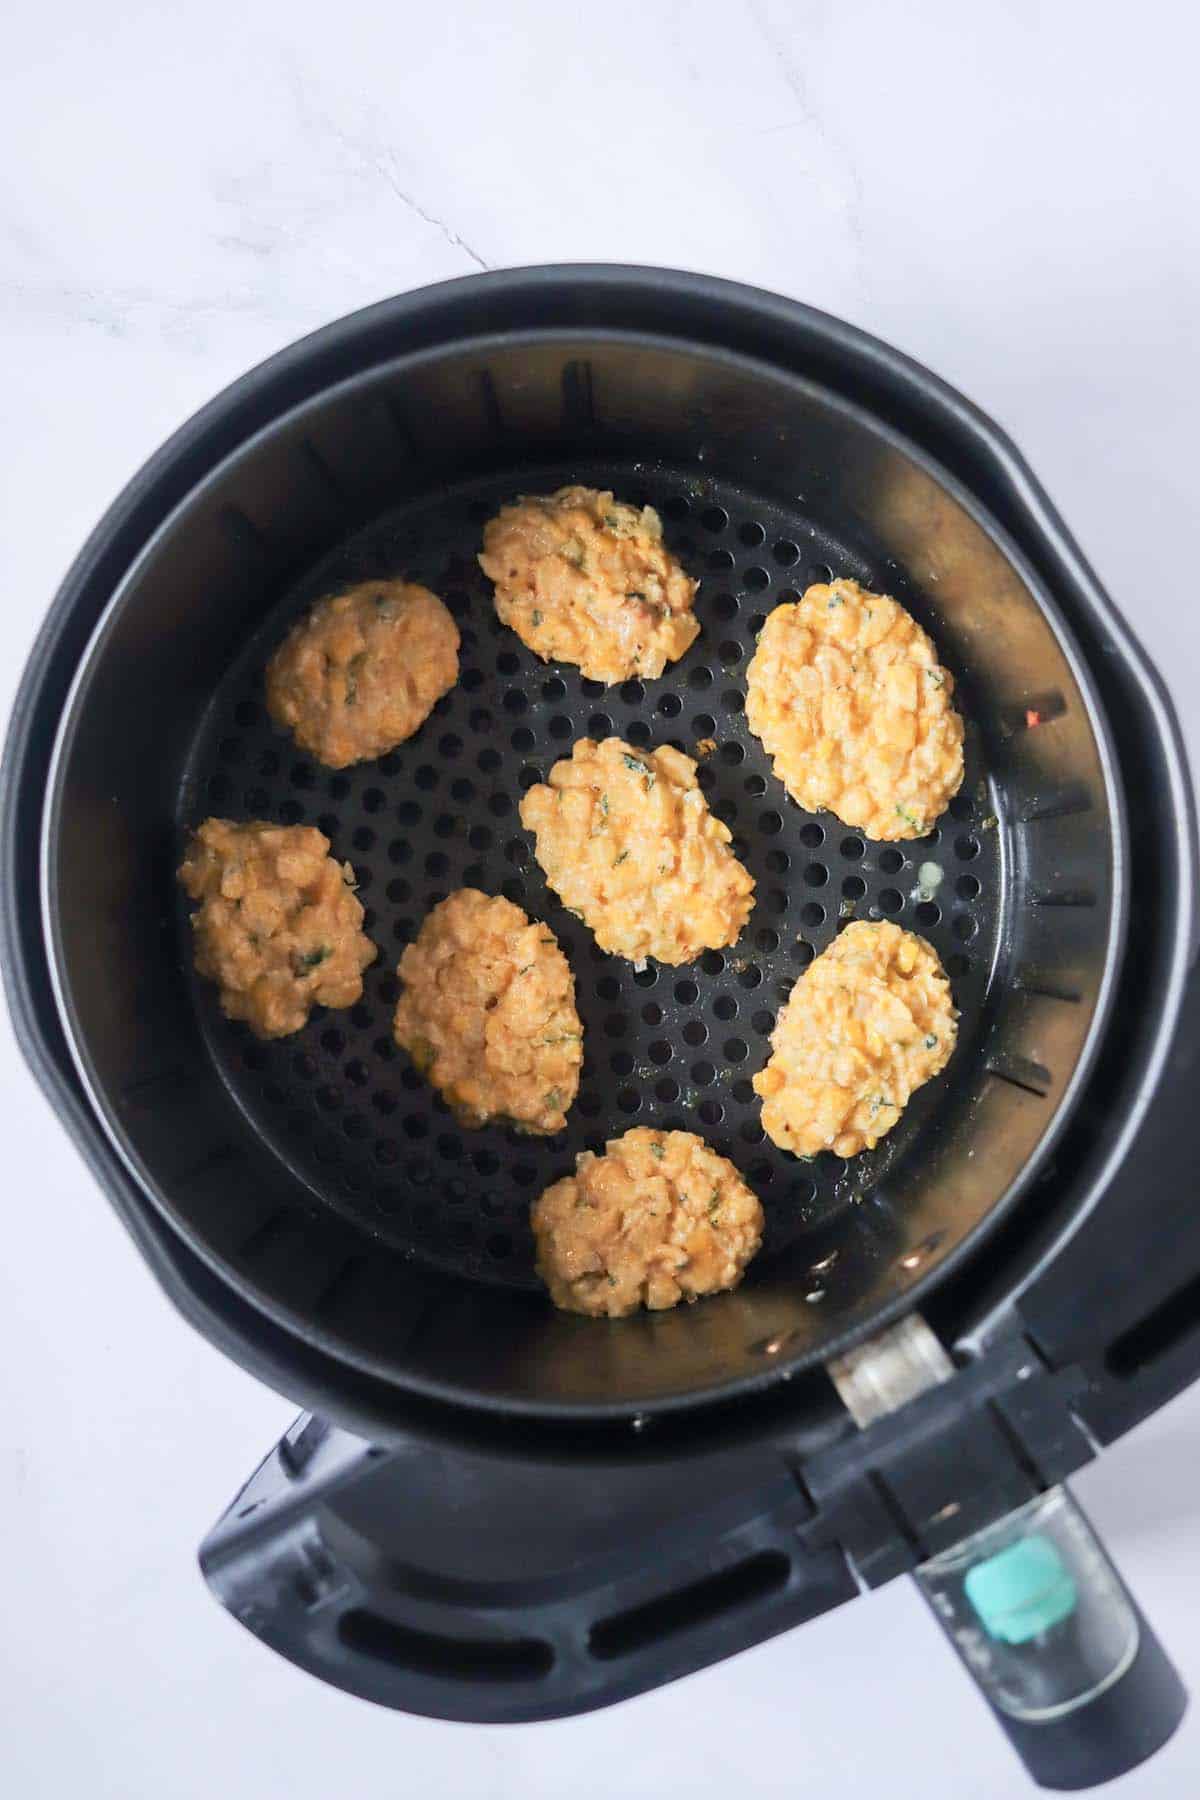 Uncooked corn fritters in the air fryer basket.